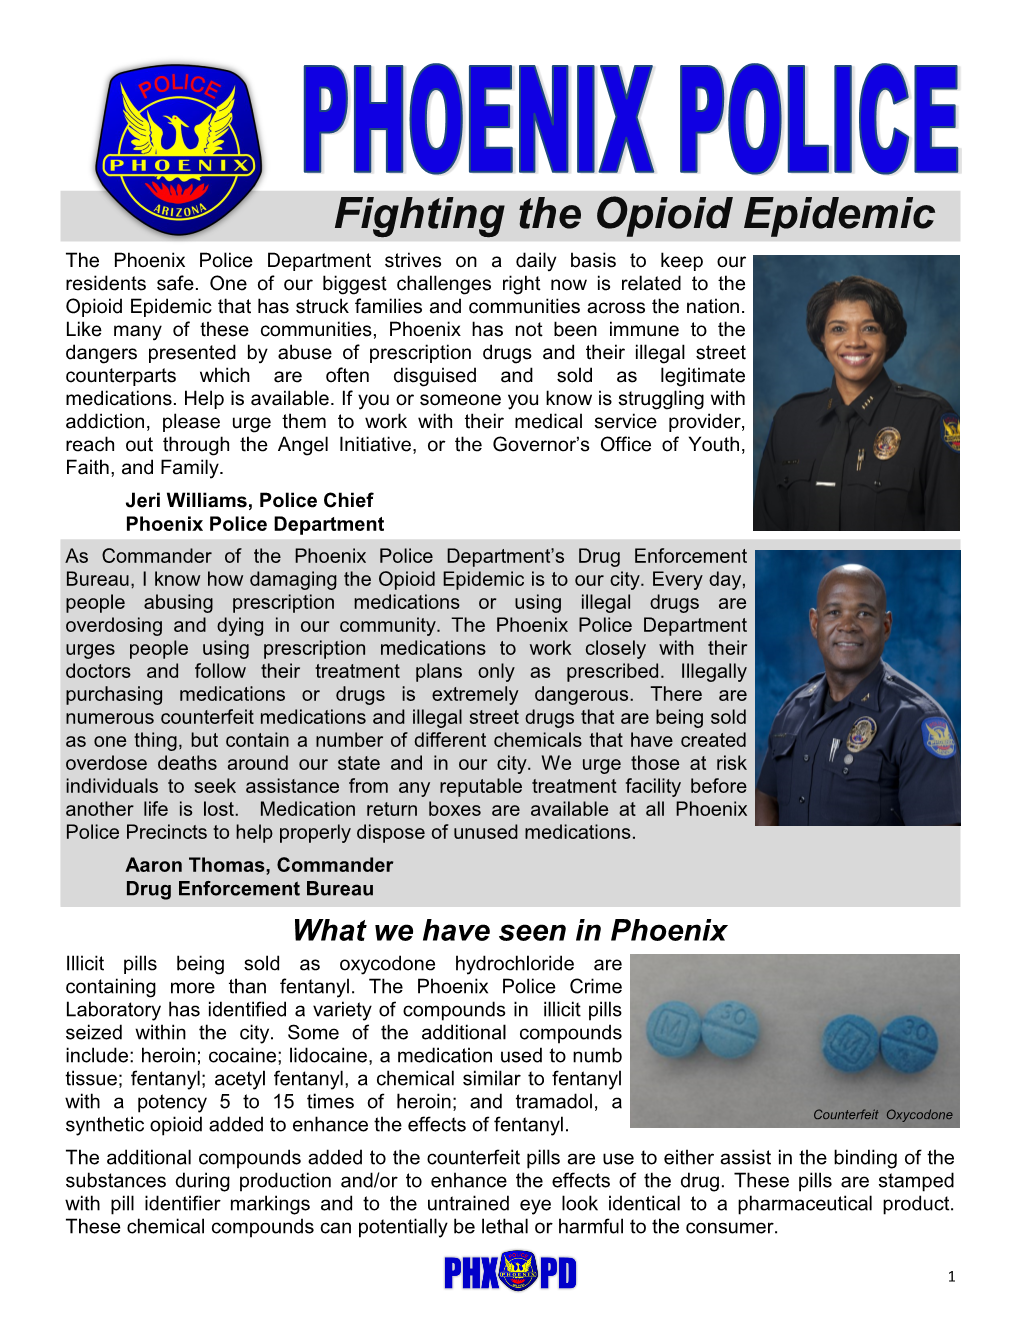 Fighting the Opioid Epidemic the Phoenix Police Department Strives on a Daily Basis to Keep Our Residents Safe